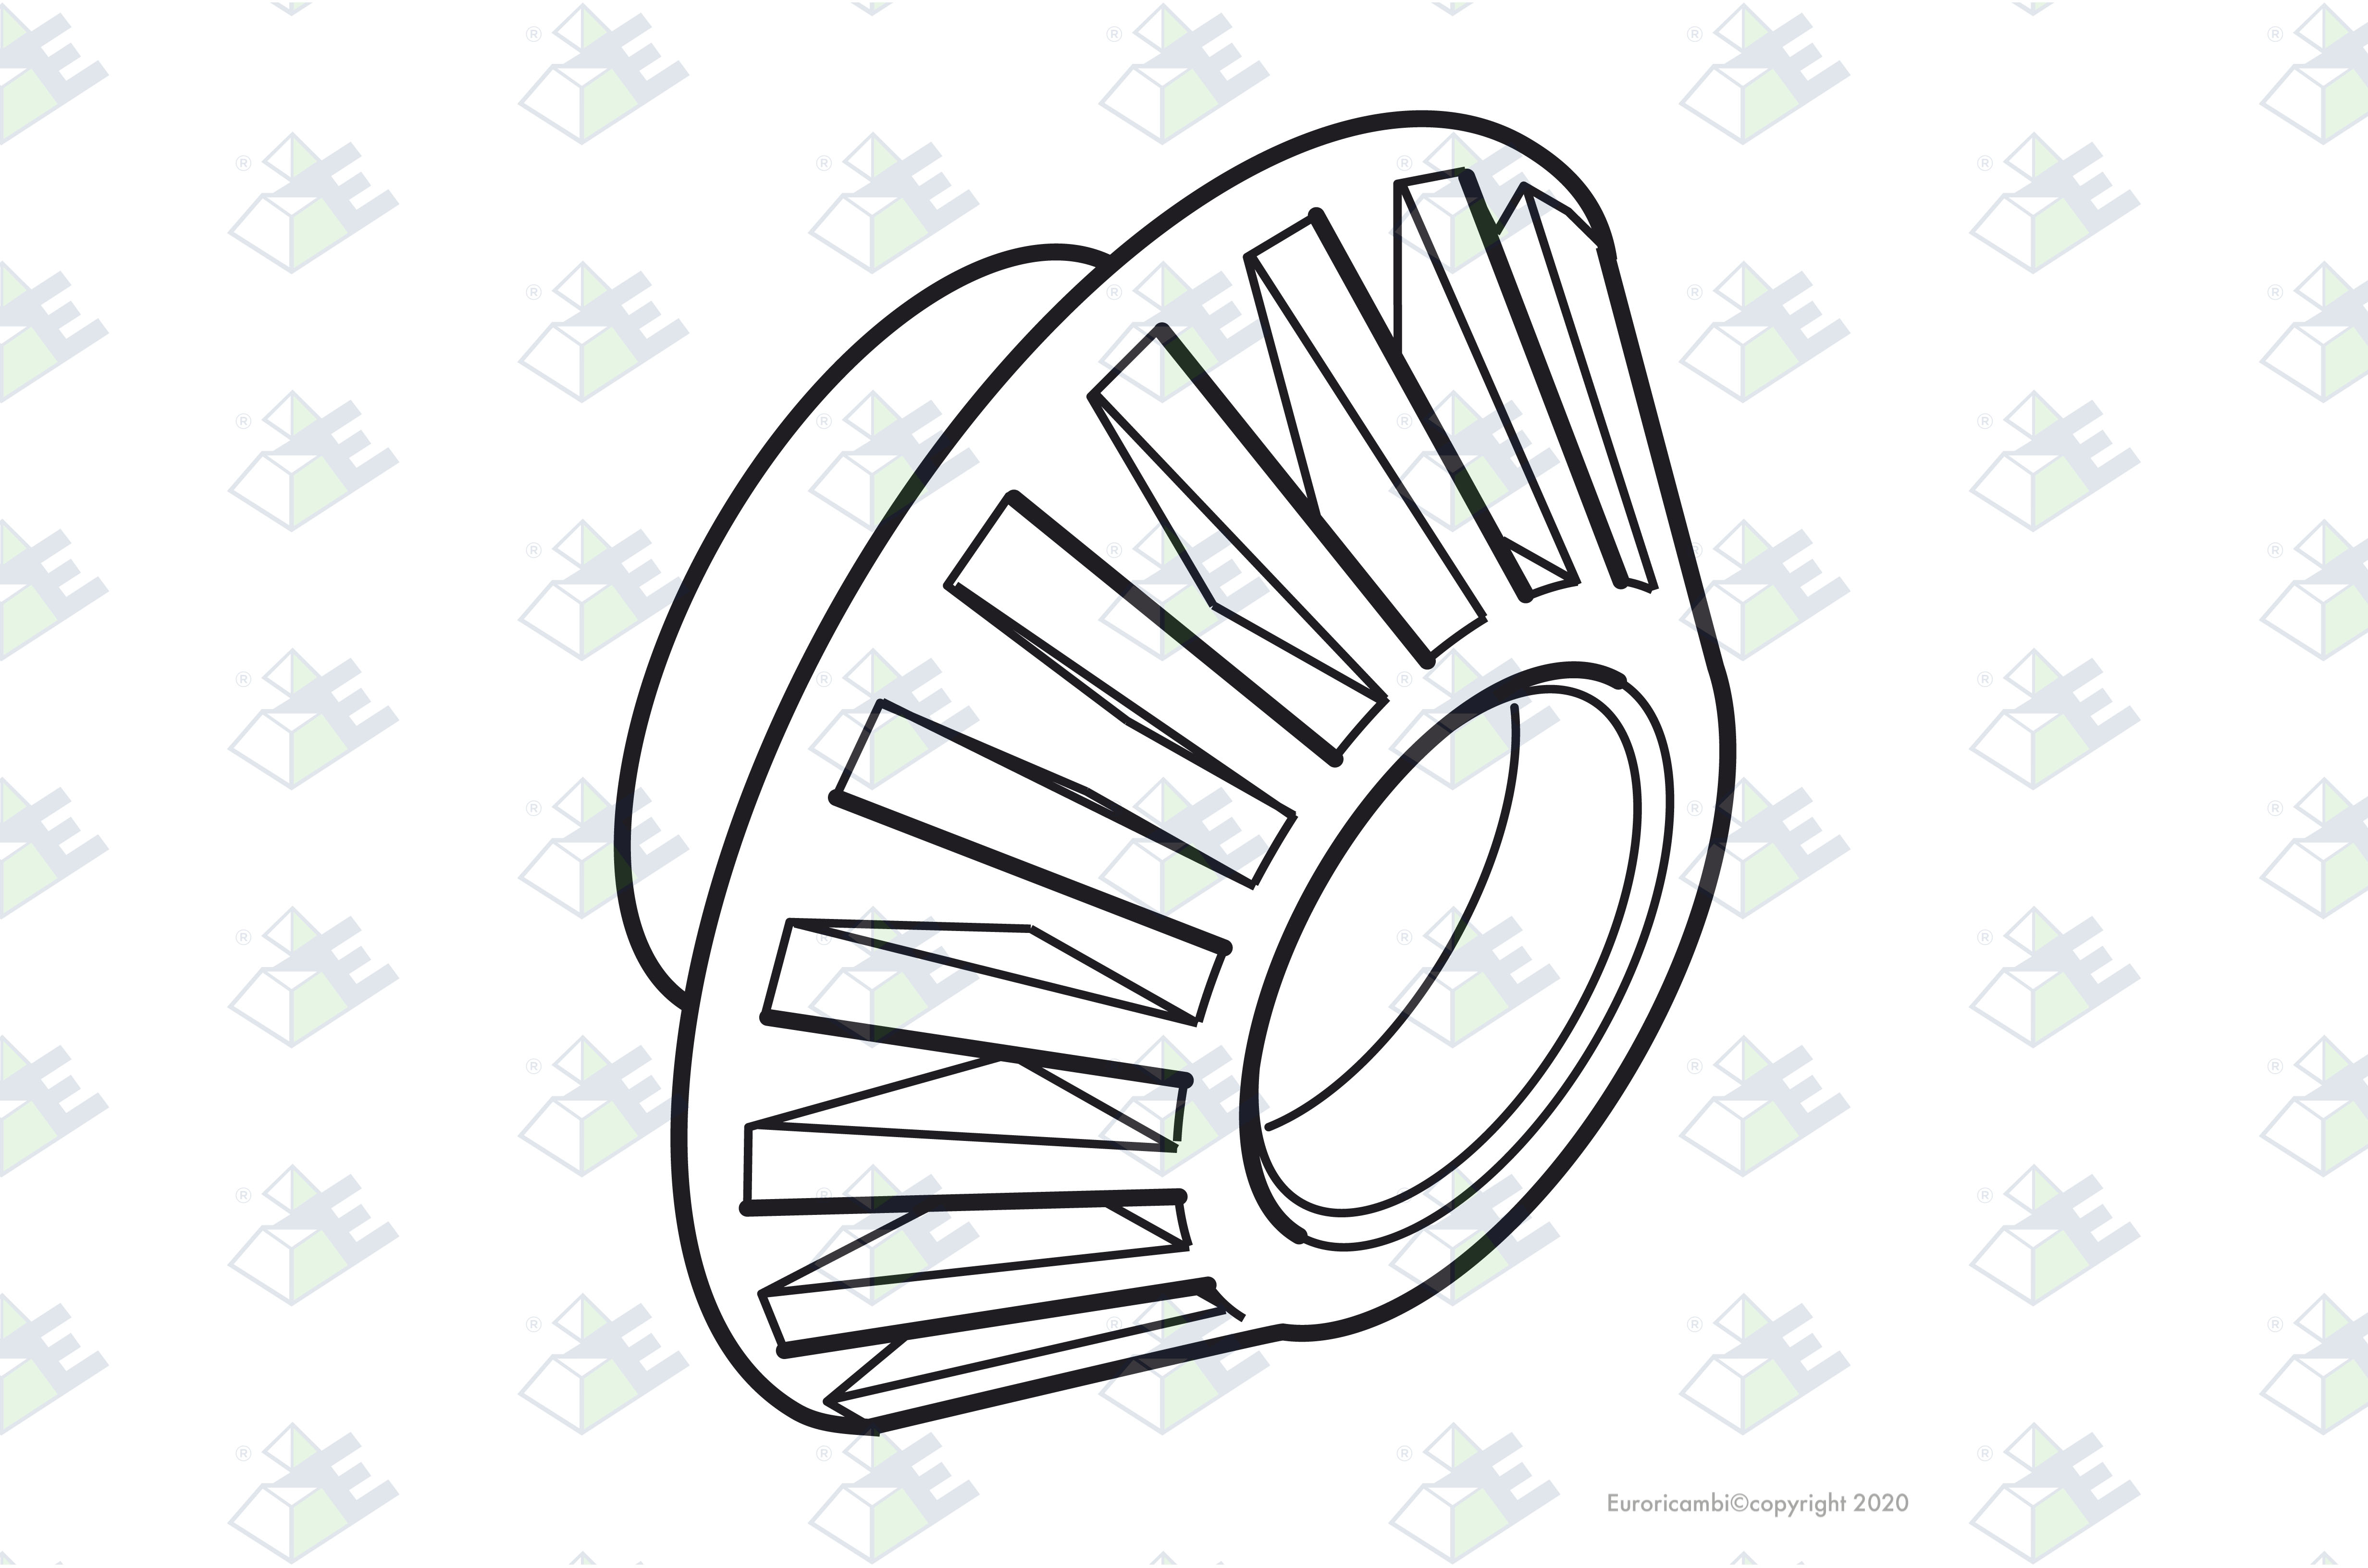 SIDE GEAR 16 T - 40 SPL. suitable to EUROTEC 18000080